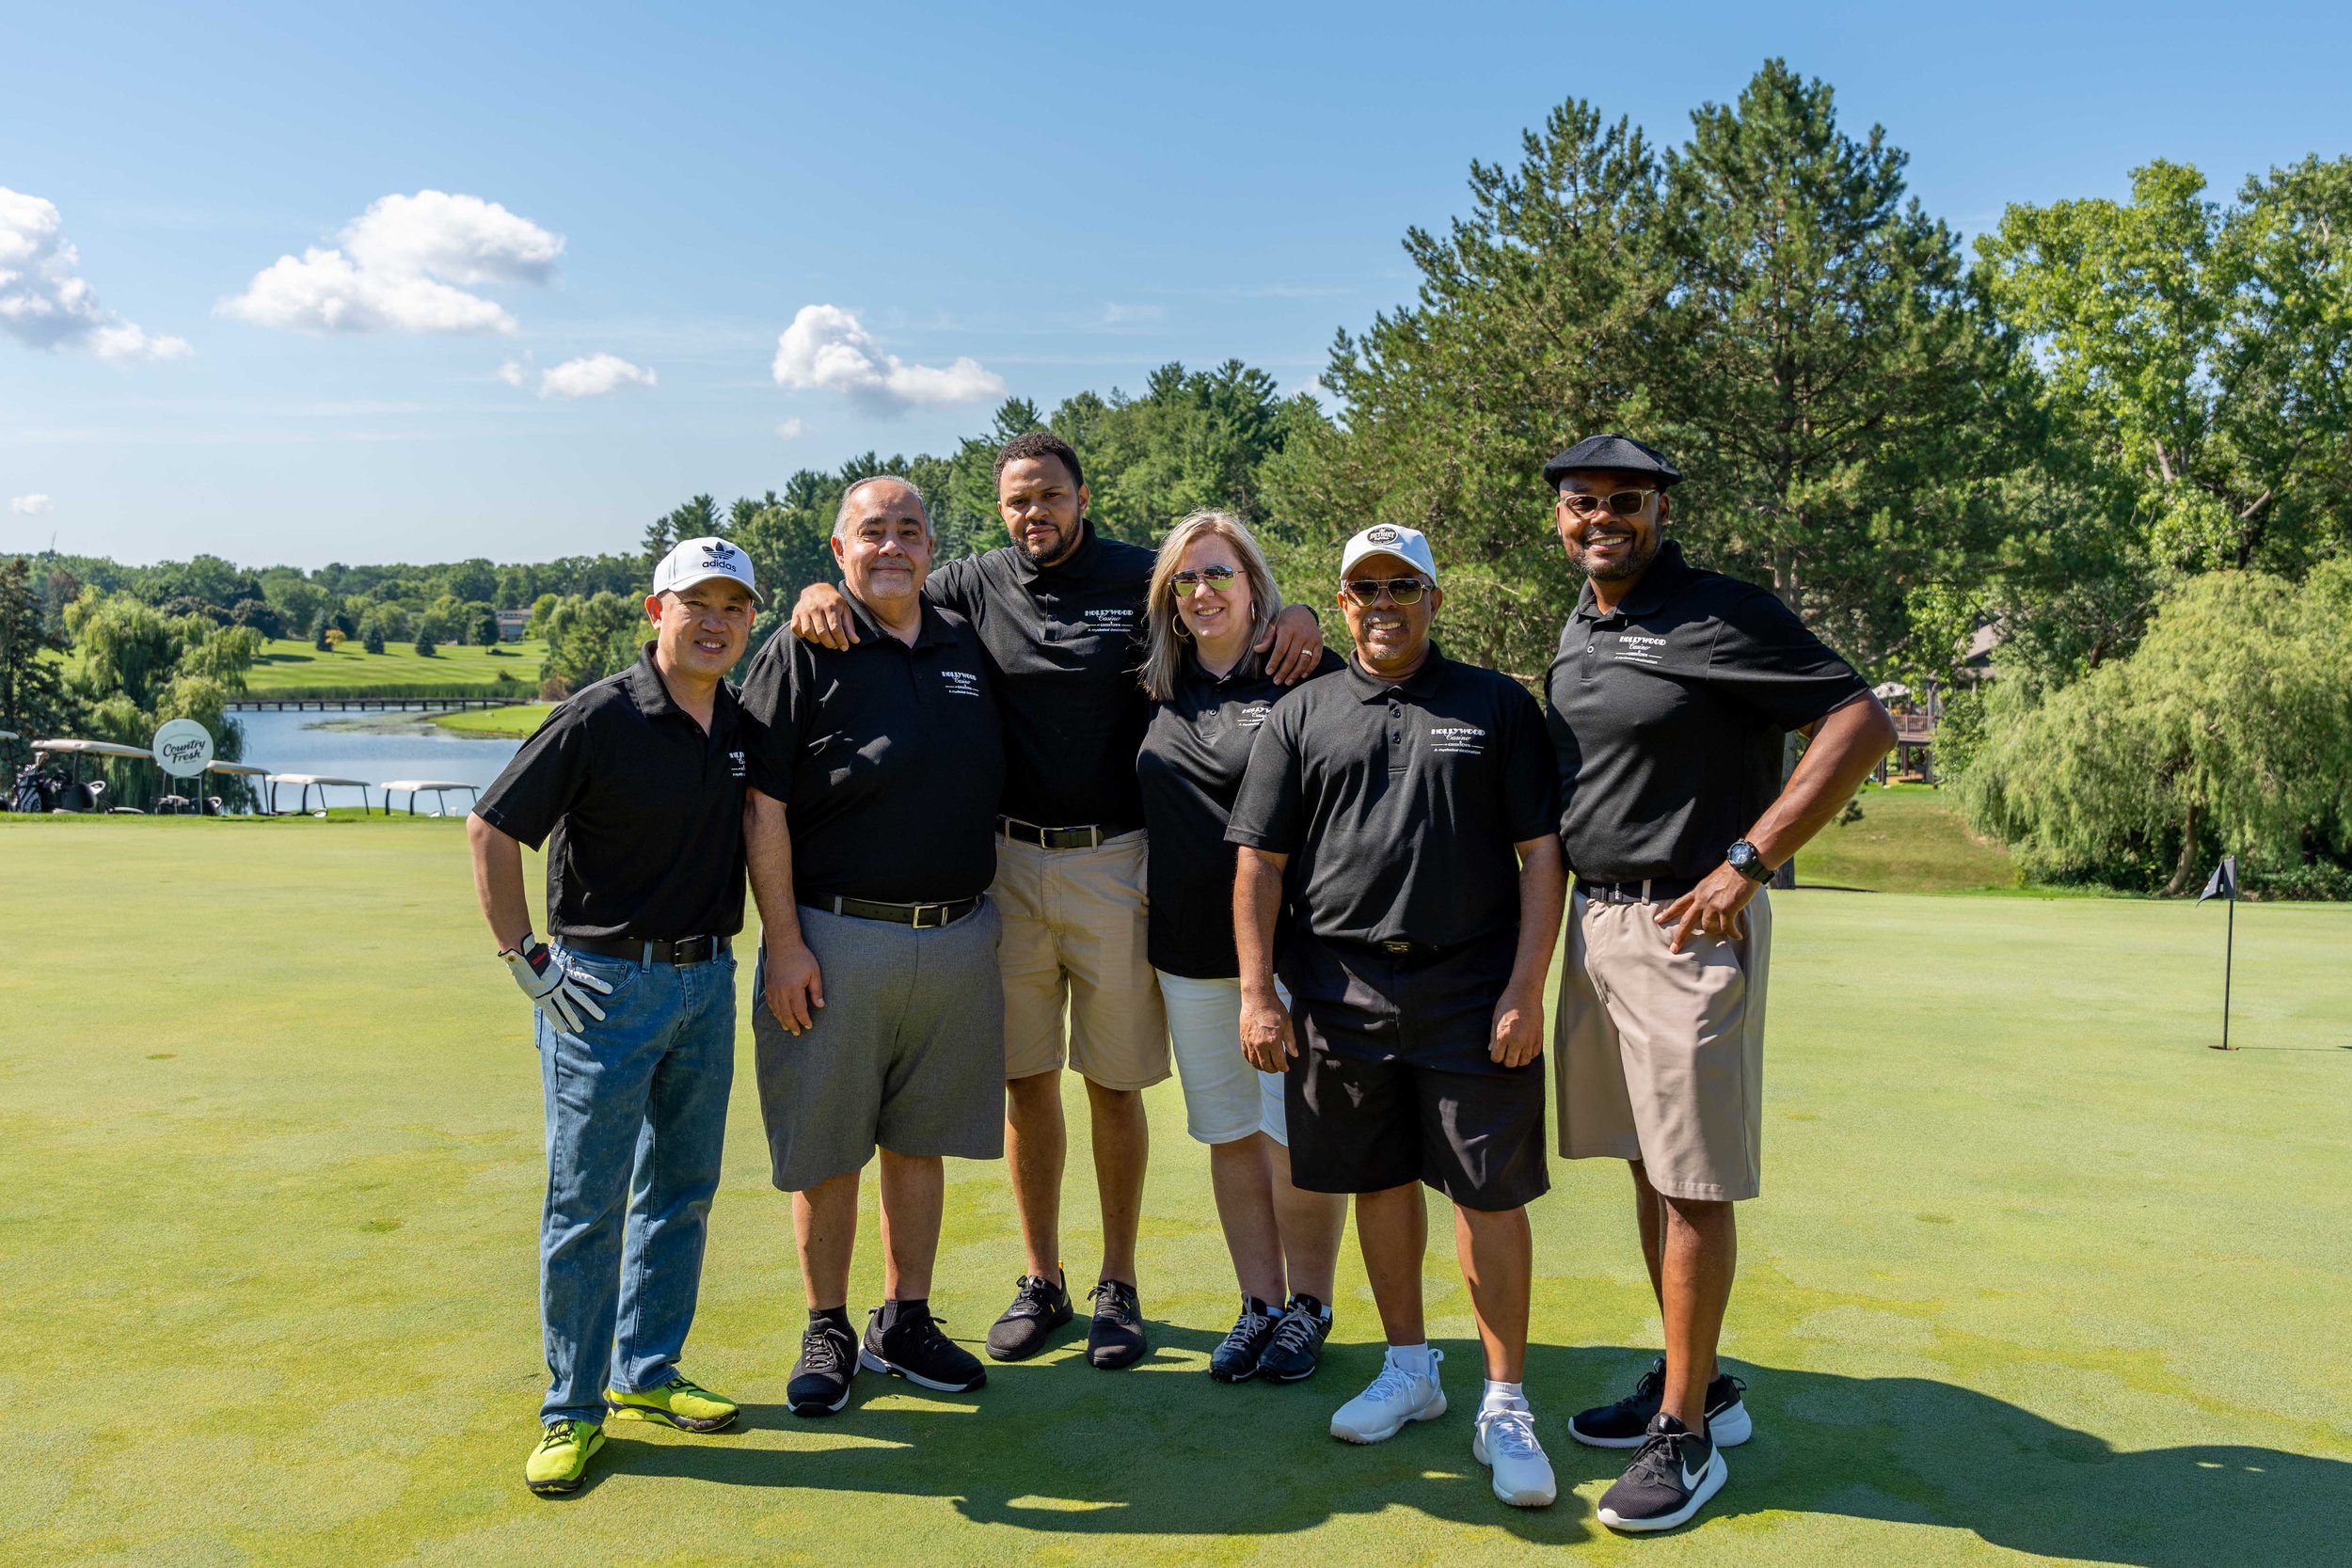  Members of the presenting sponsor team, from left to right: Dustin Huynh, Sam Arabo, Robert Giles, Michele Keagy, Joseph Williams, and Octaveious Miles. 